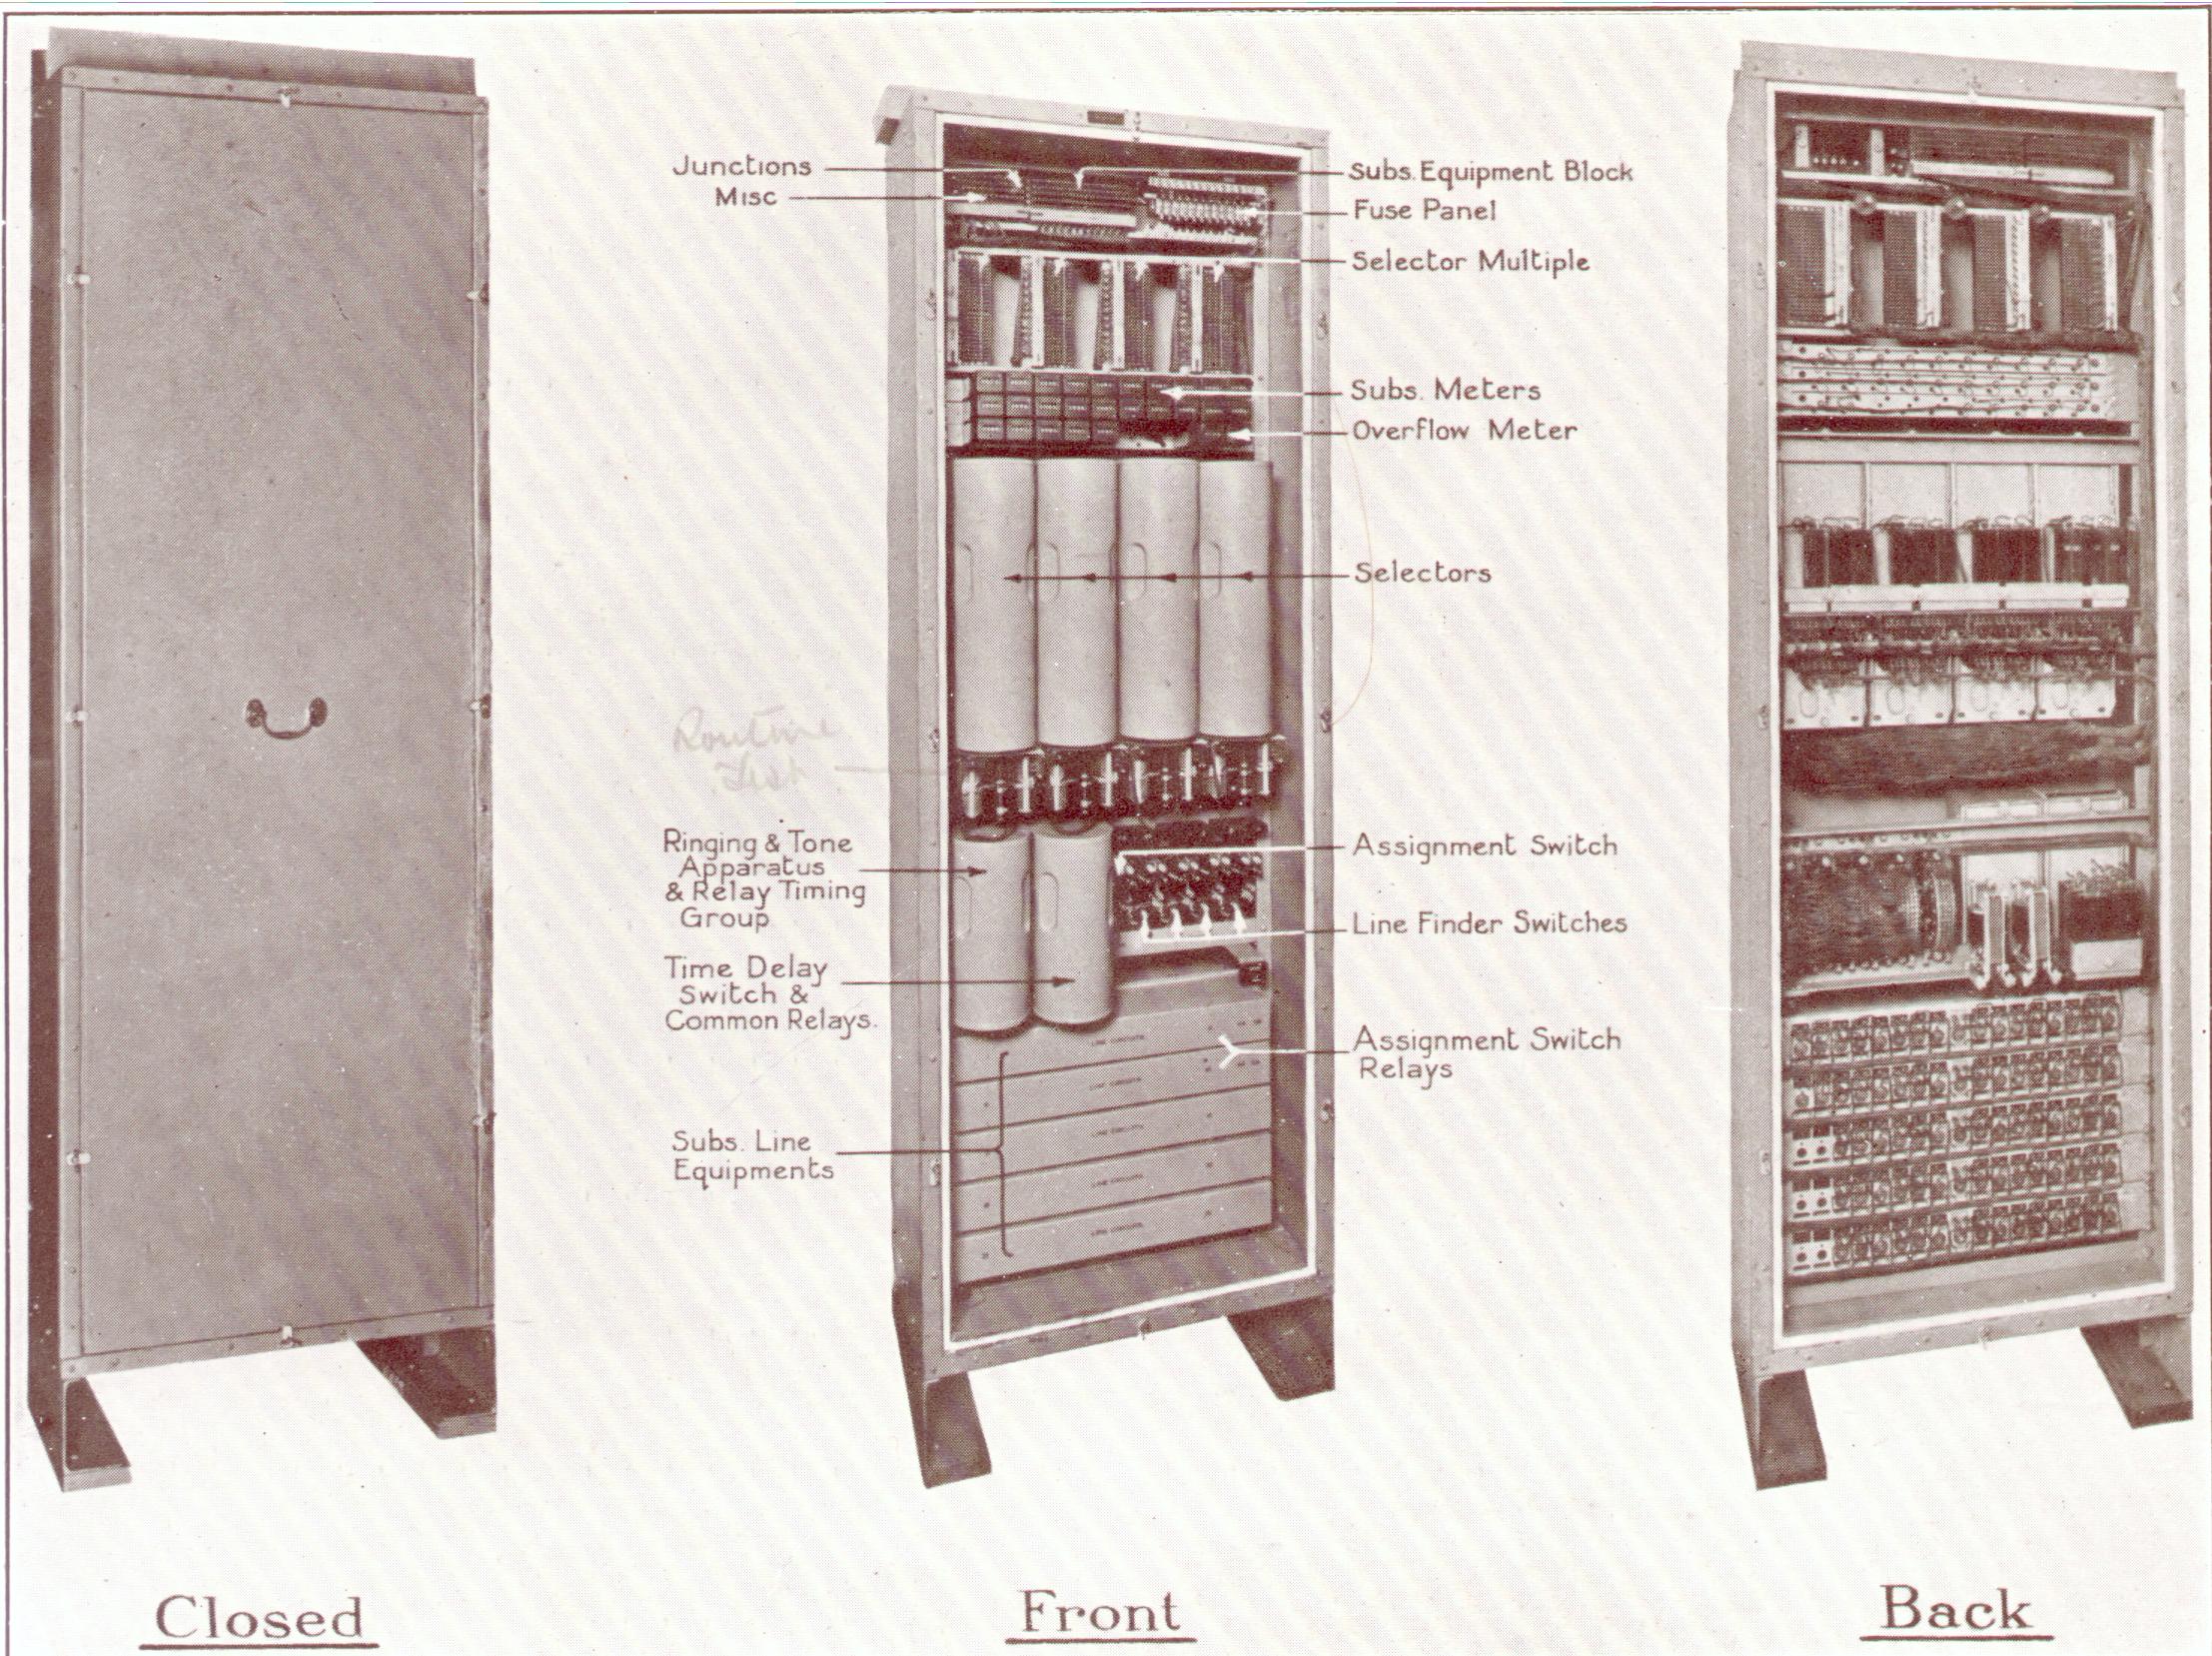 View of UAX5 rack